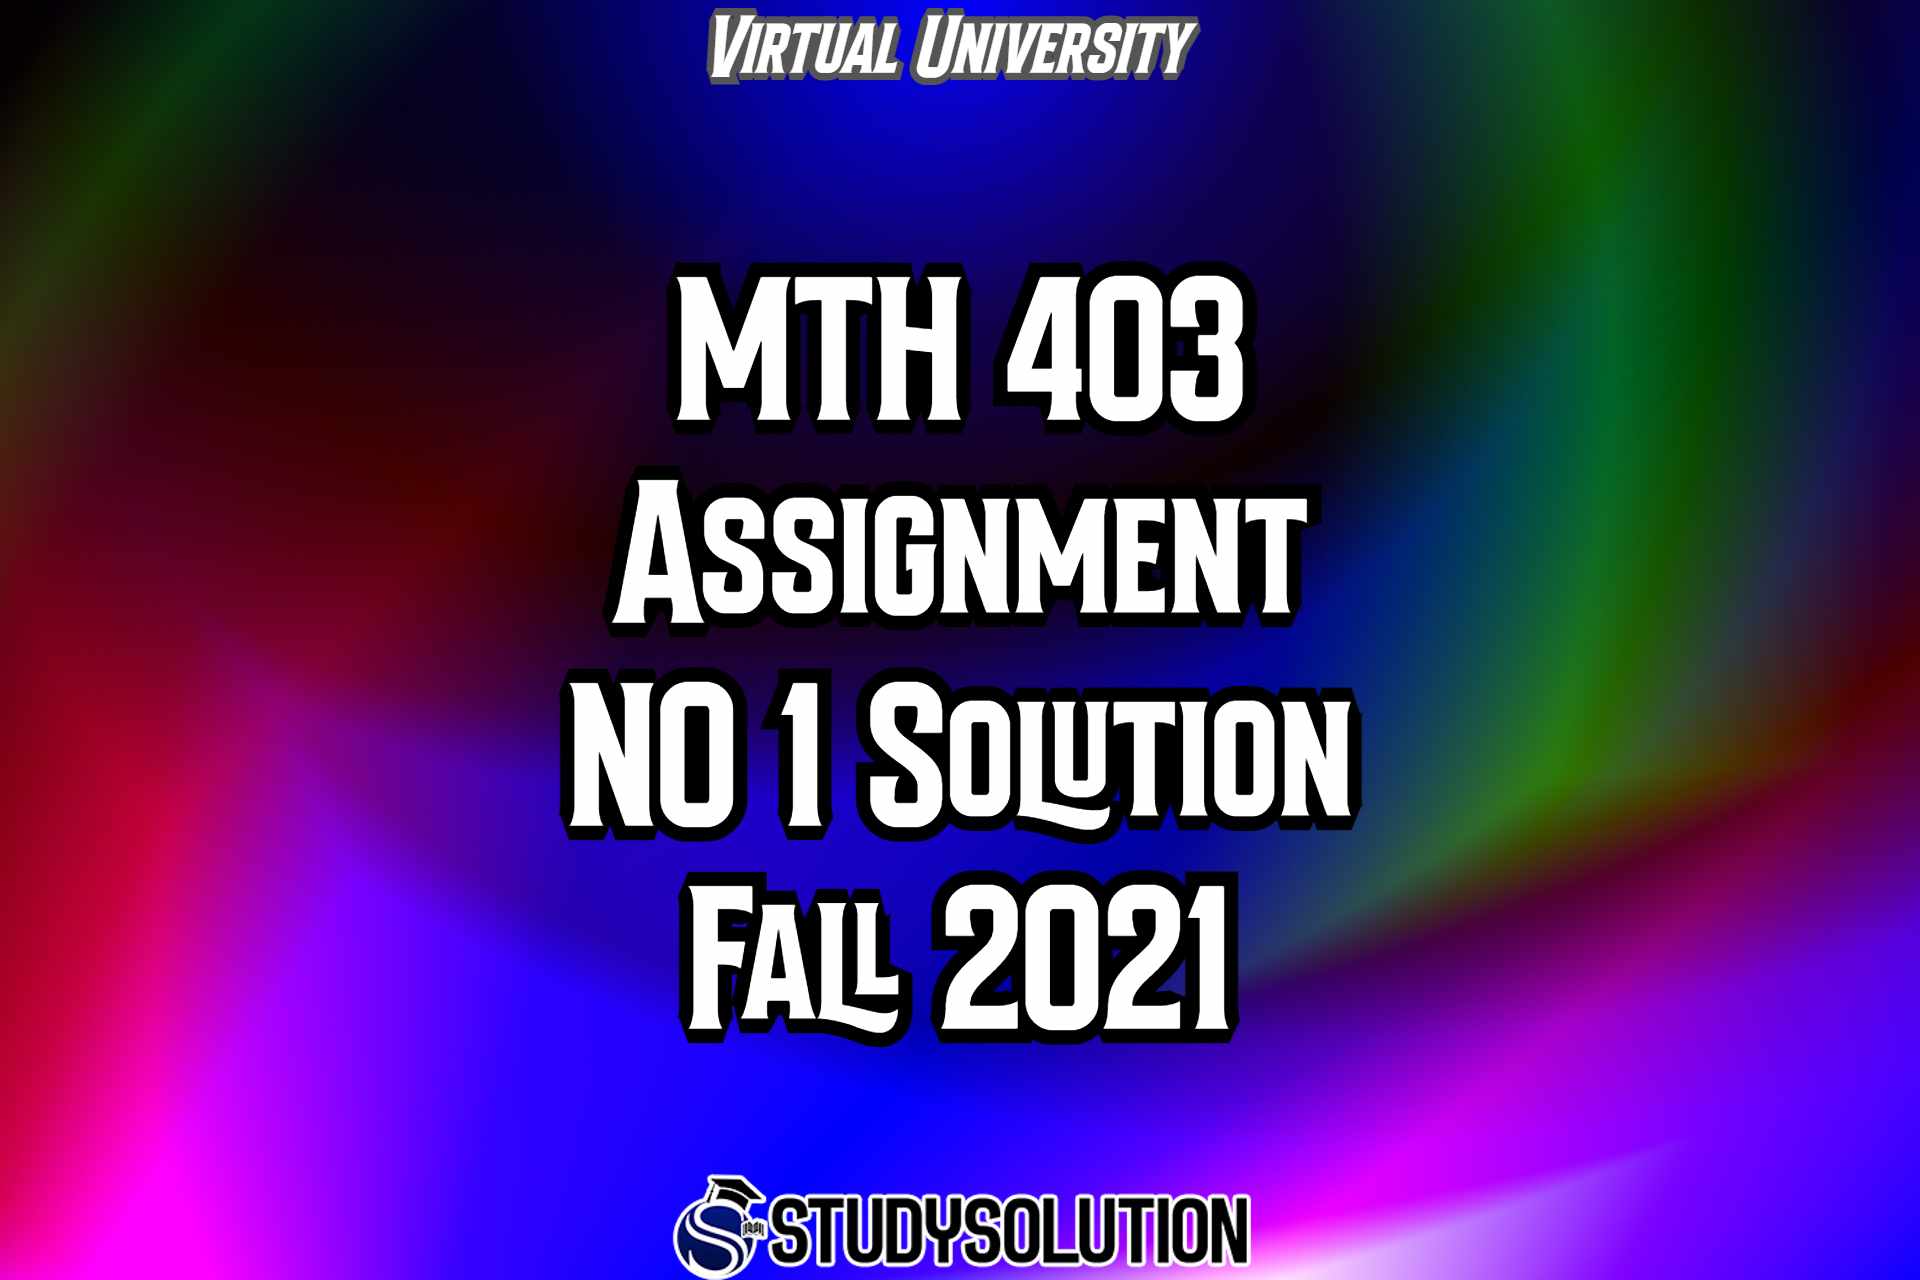 MTH403 Assignment NO 1 Solution Fall 2021